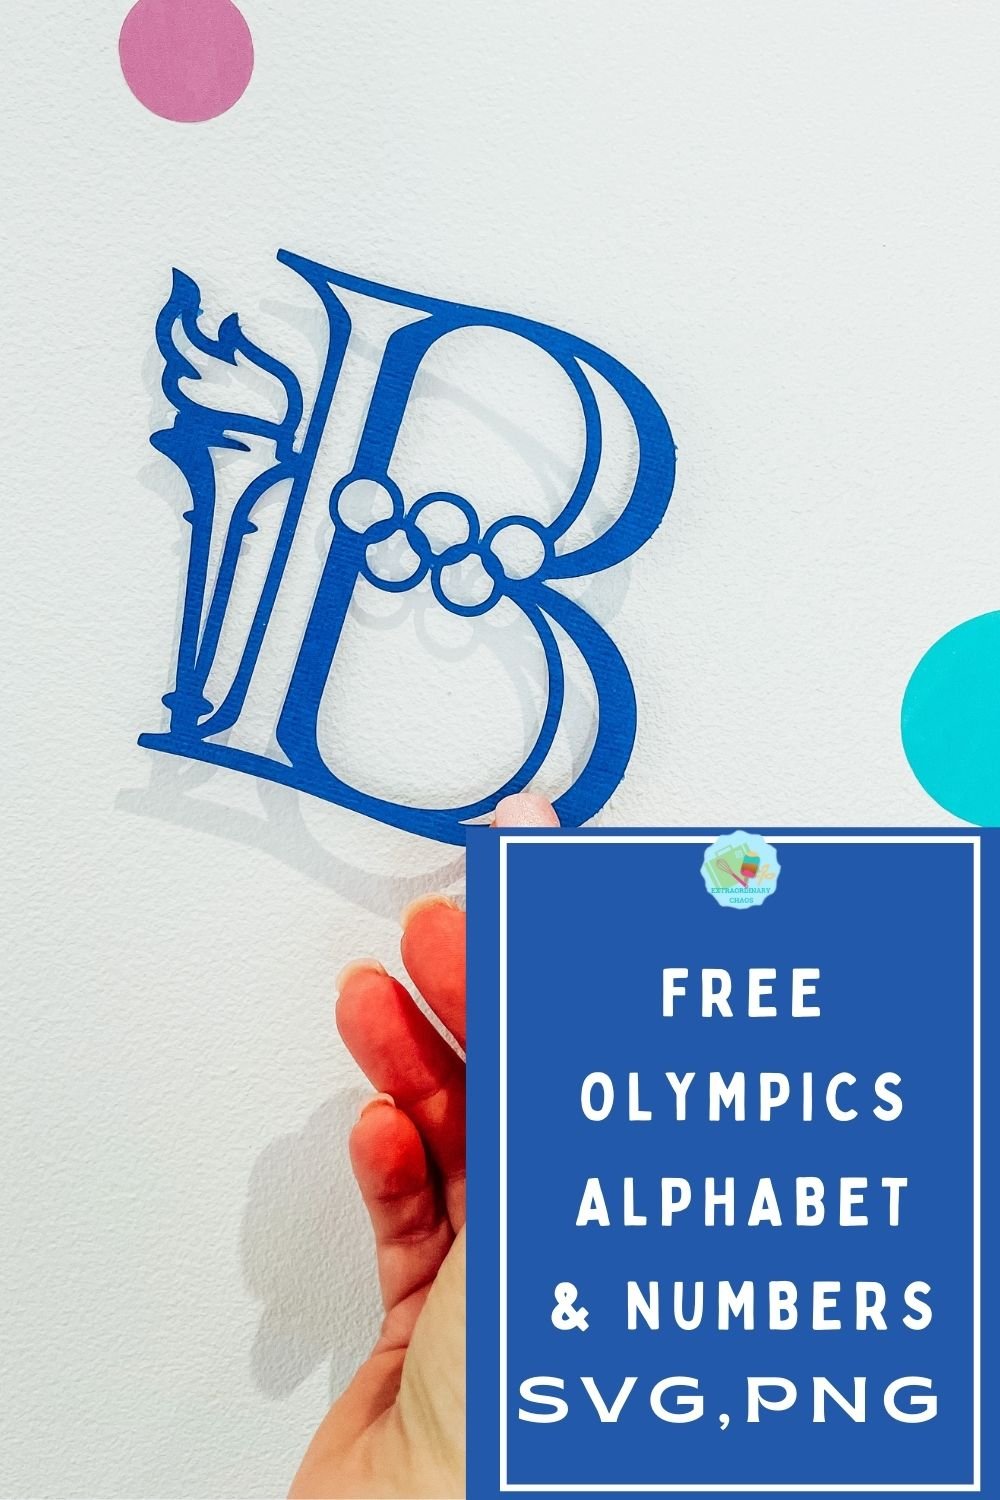 Free Olympics Alphabet and Numbers in SVG and PNG-6